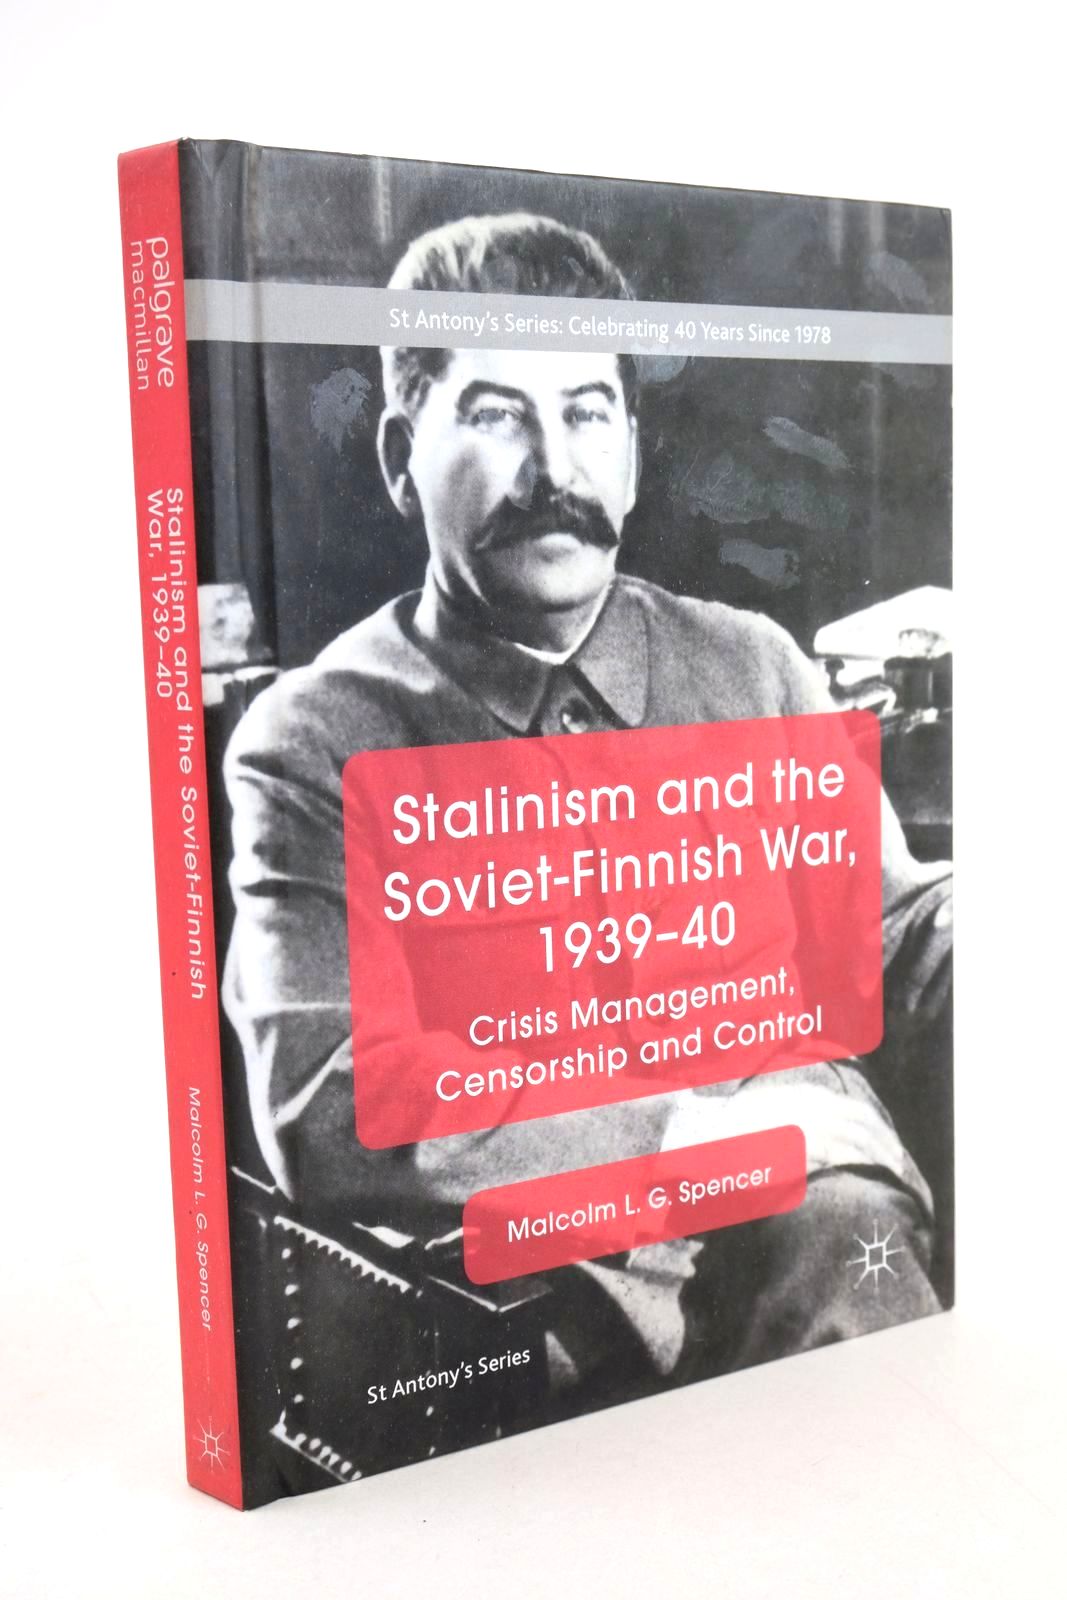 Photo of STALINISM AND THE SOVIET-FINNISH WAR, 1939-40 written by Spencer, Malcolm L.G. published by Palgrave Macmillan (STOCK CODE: 1327554)  for sale by Stella & Rose's Books